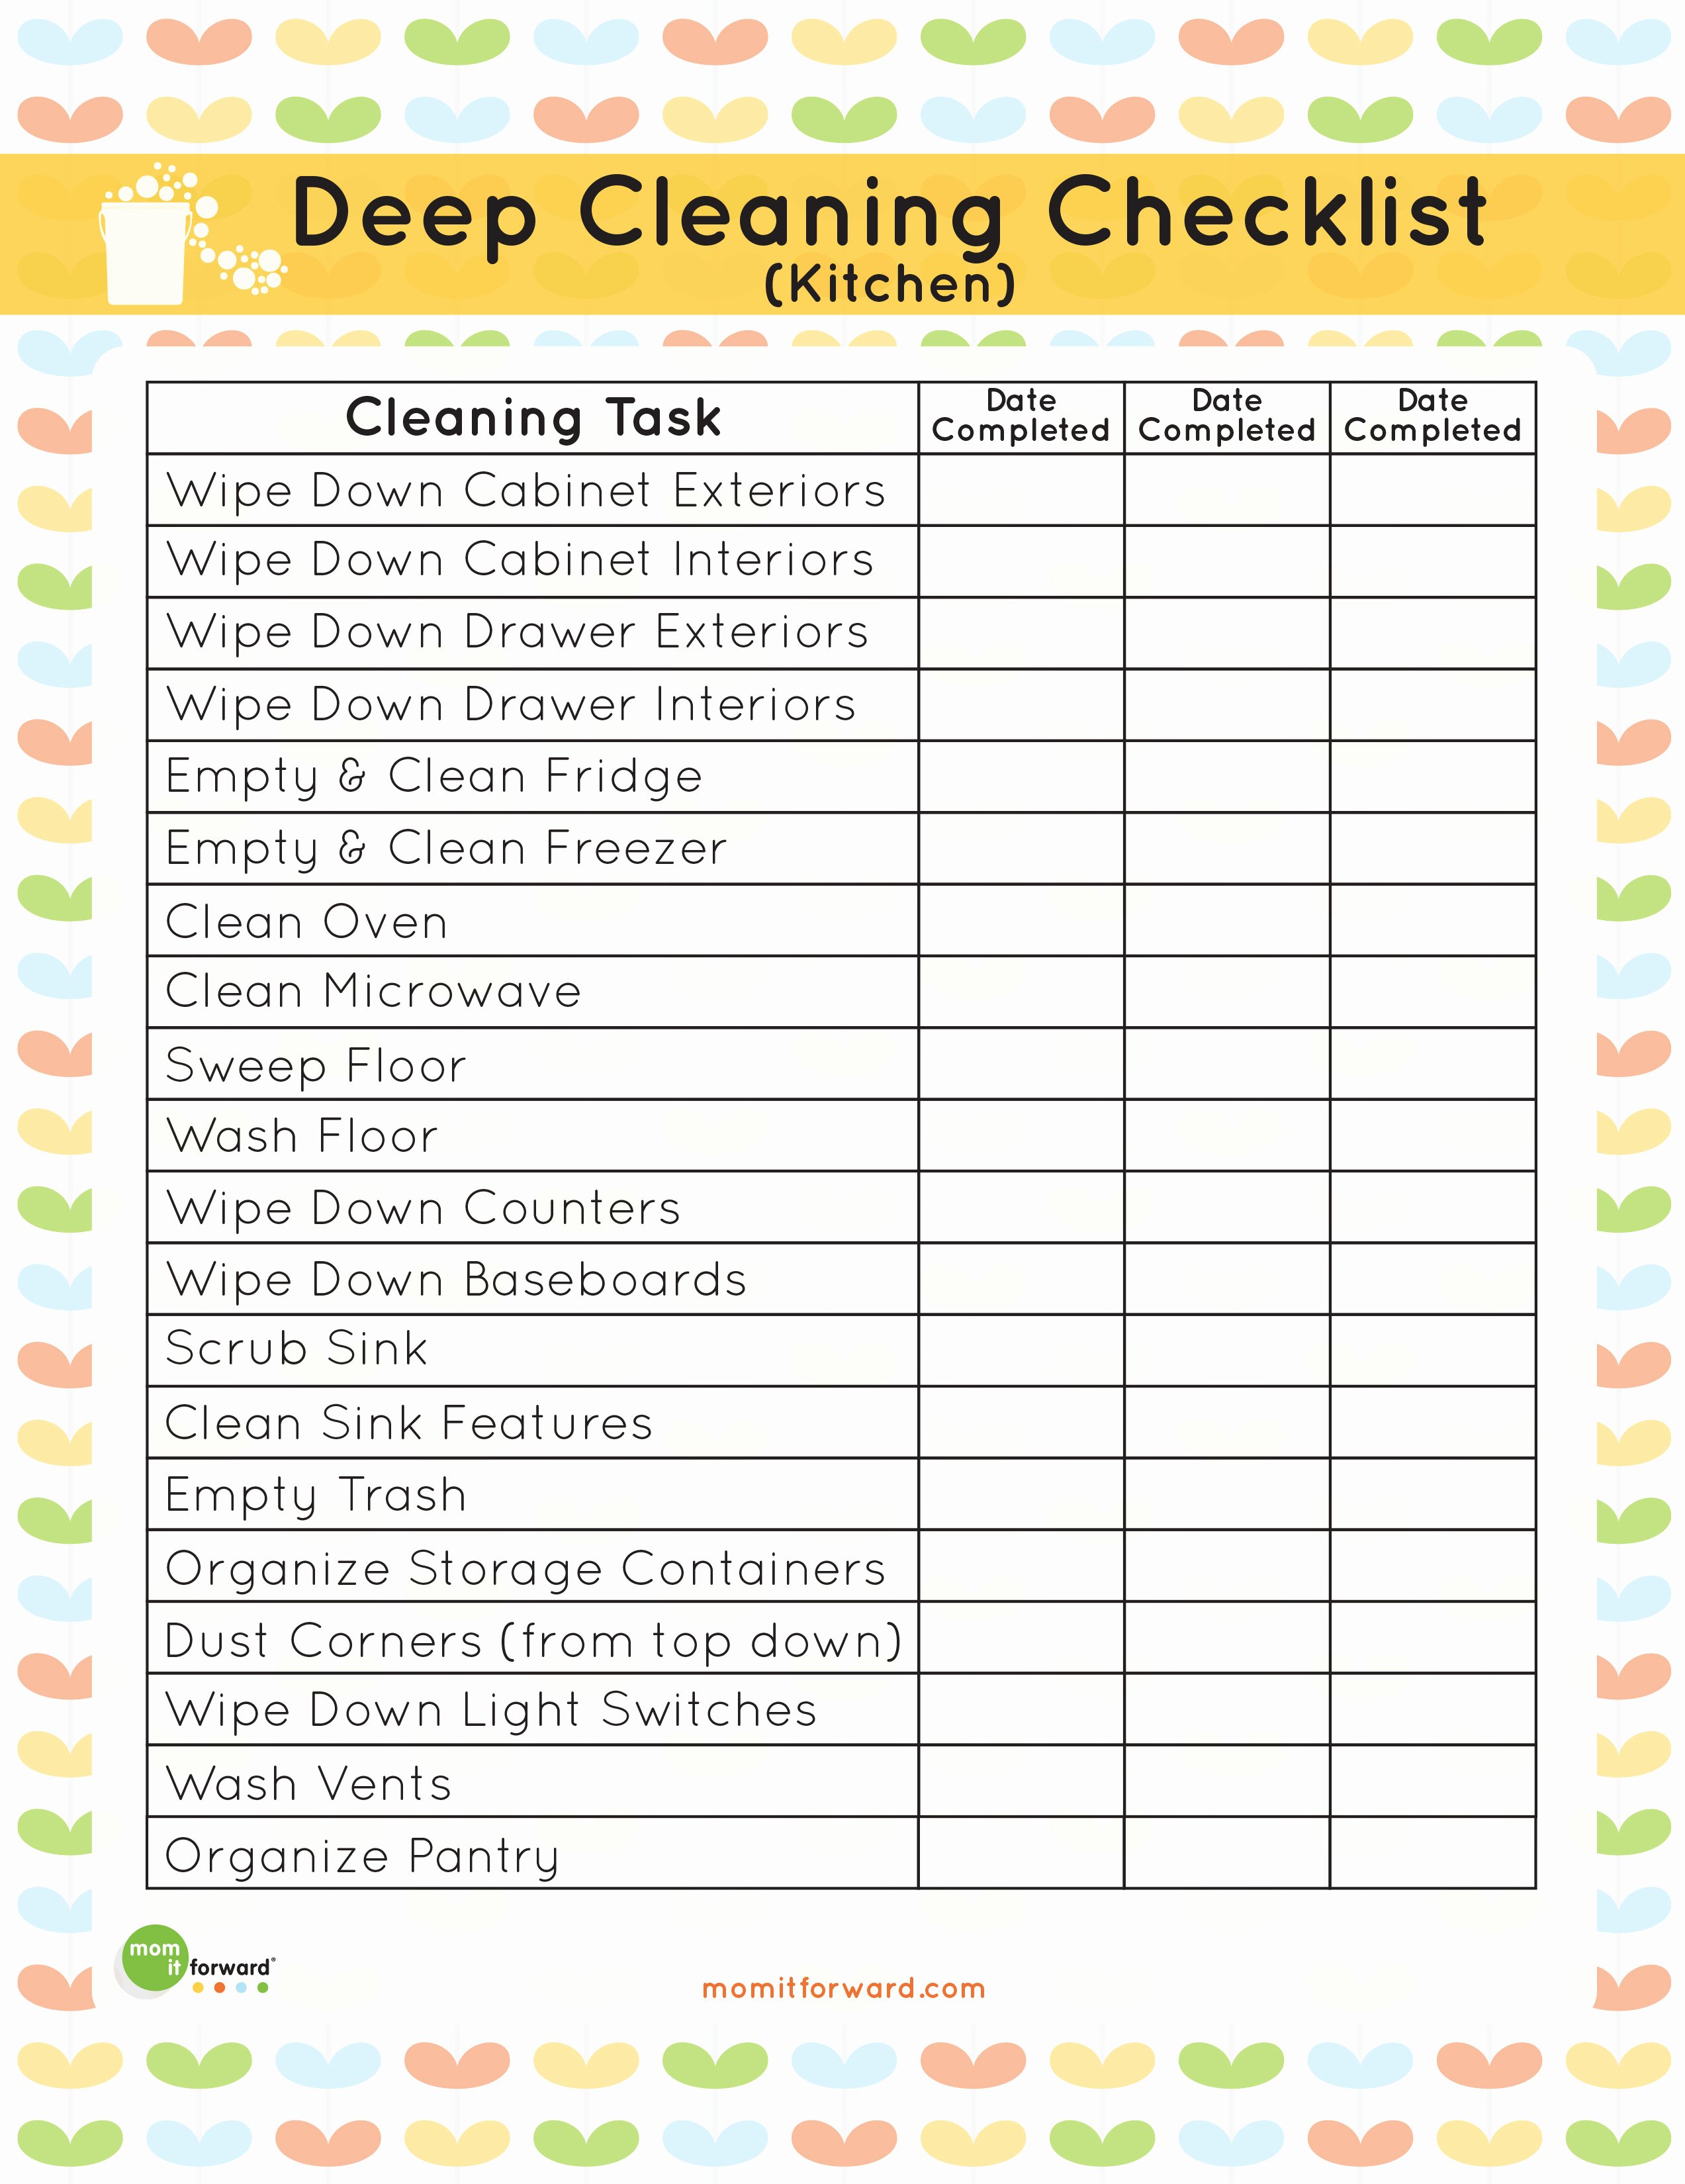 Professional House Cleaning Checklist Printable New Printable Kitchen Cleaning Checklist Mom It forwardmom